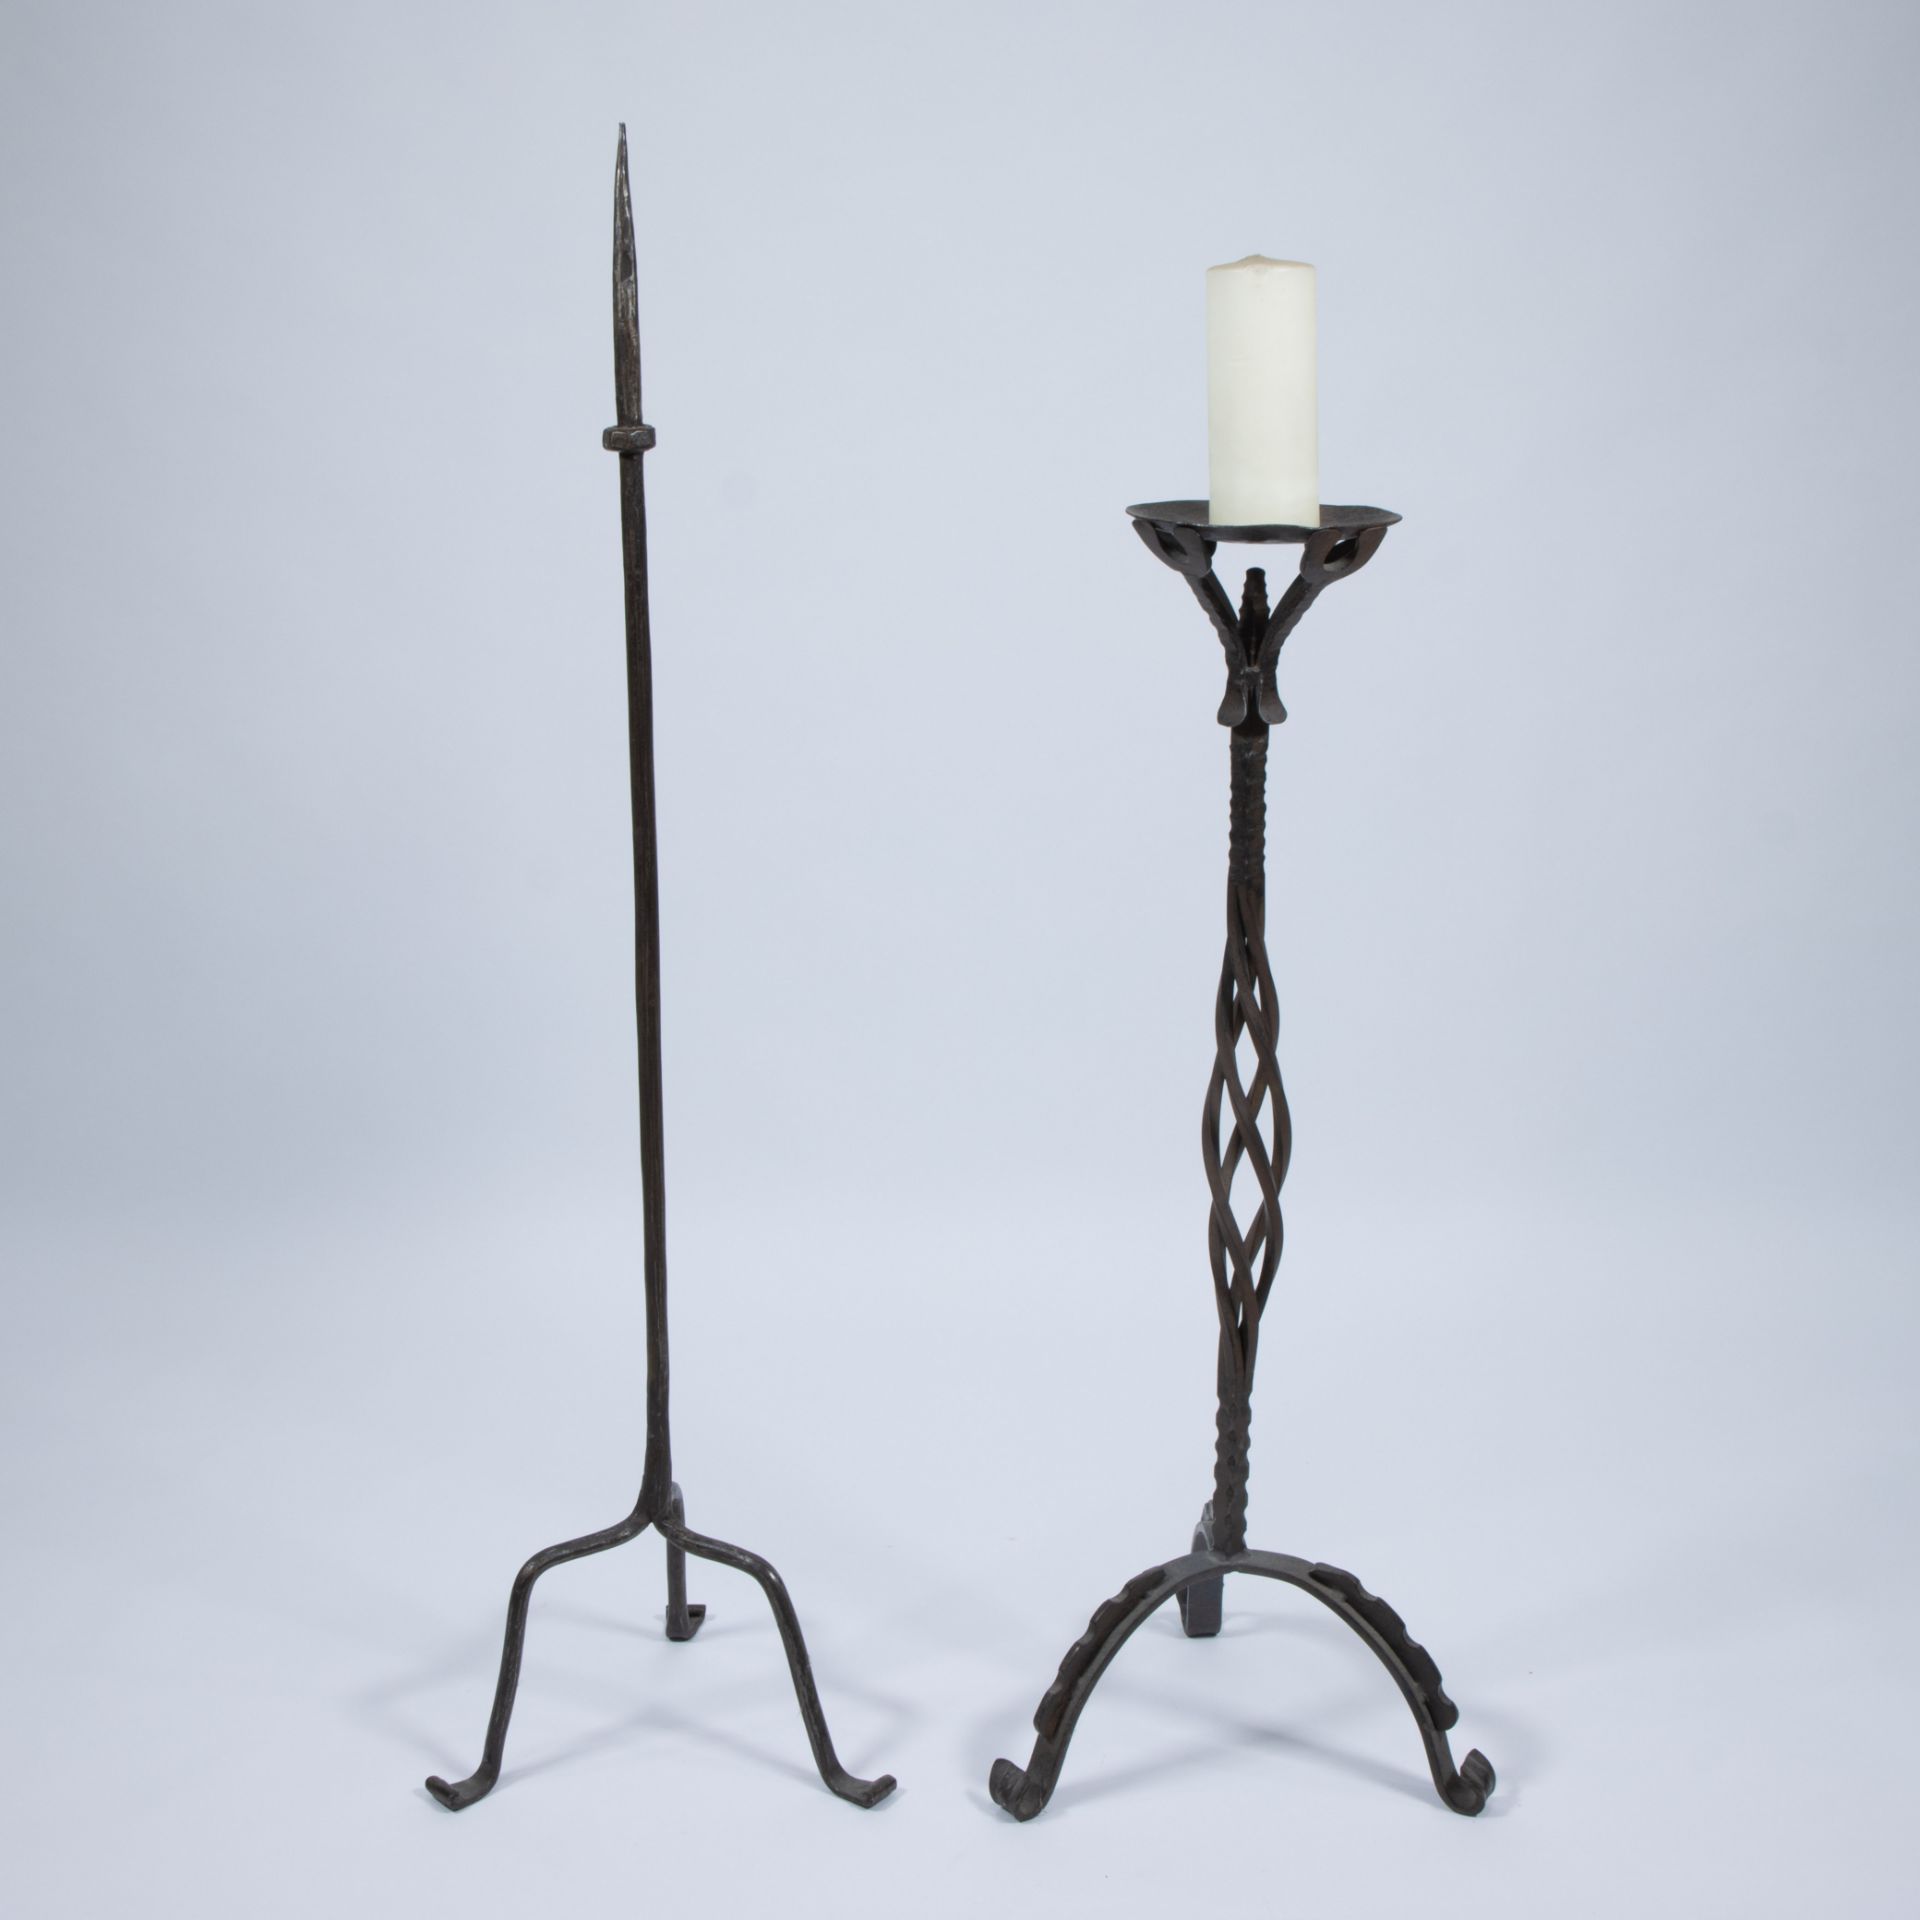 Lot of 2 wrought-iron church candlesticks 17th and 19th century - Image 2 of 3